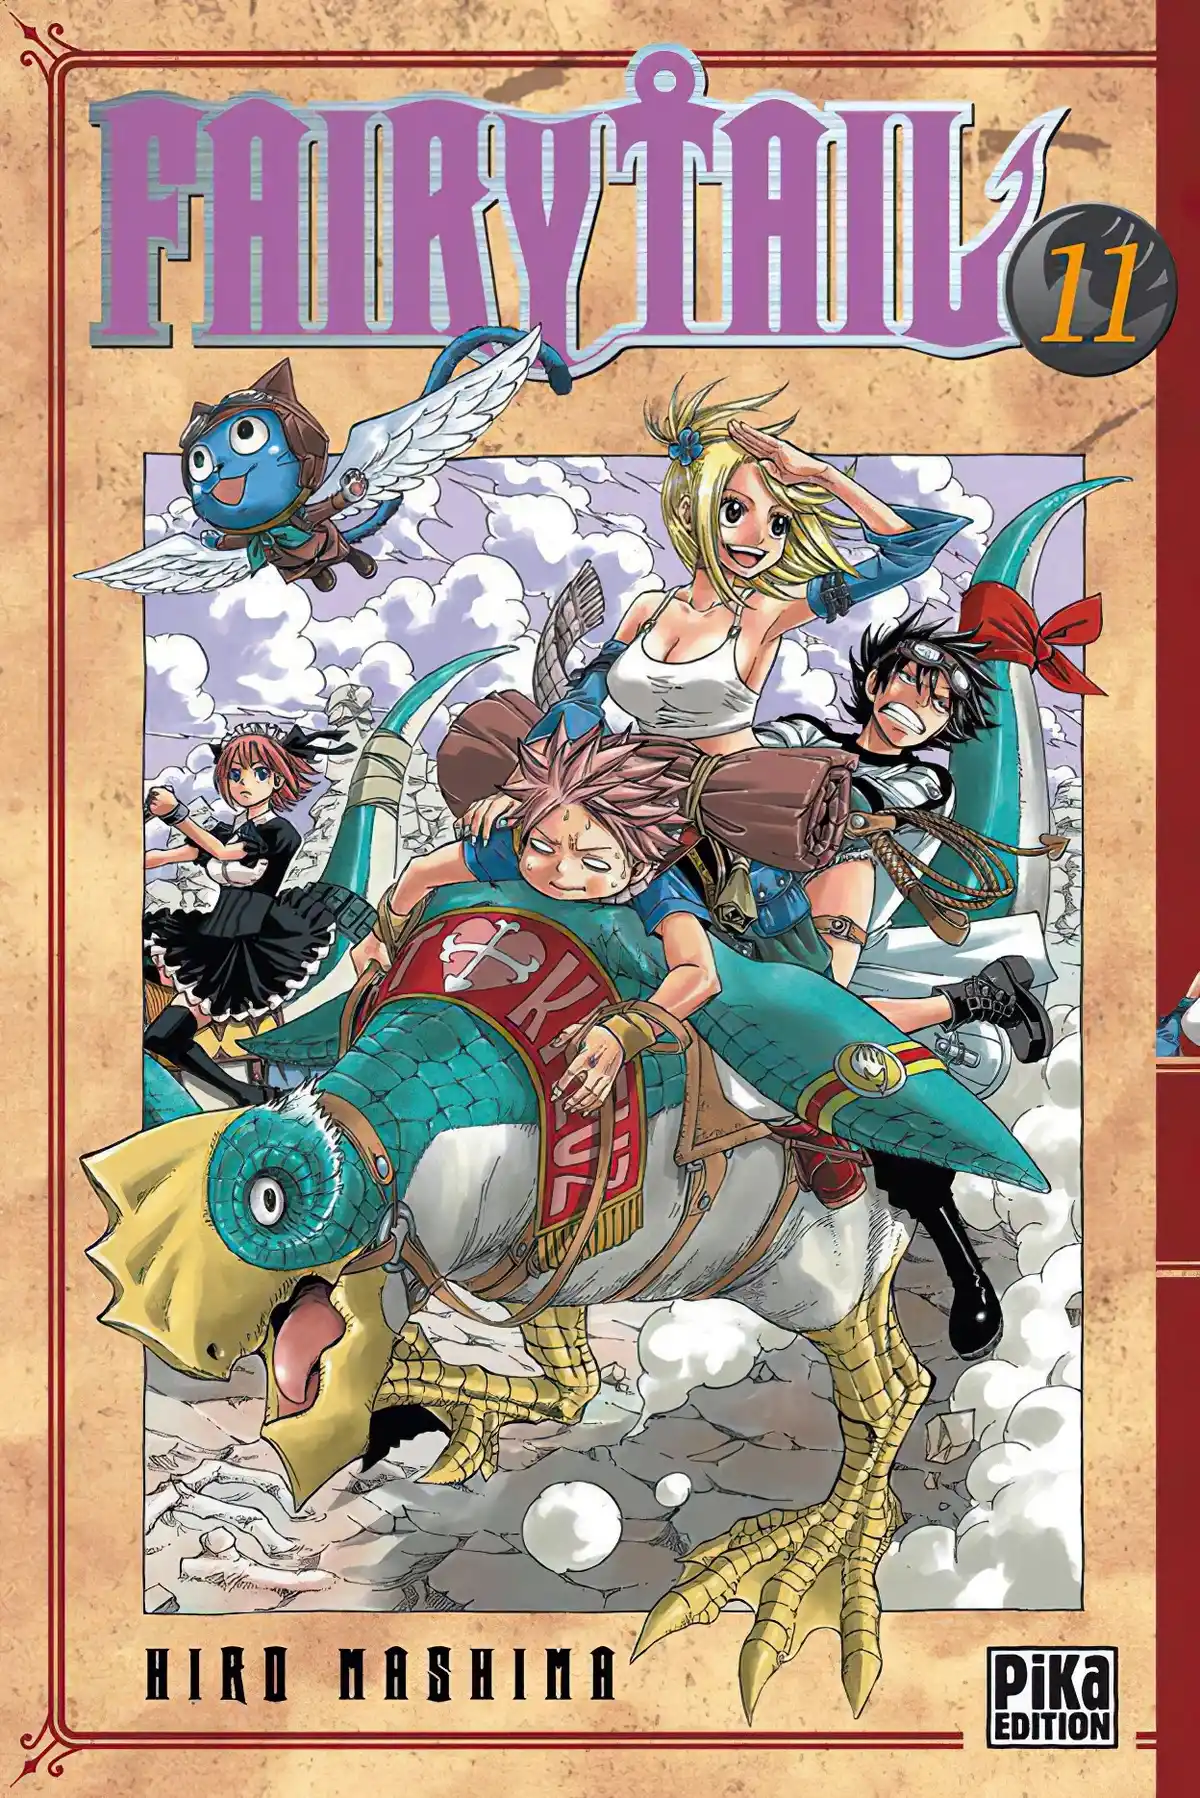 Fairy Tail Volume 11 page 1